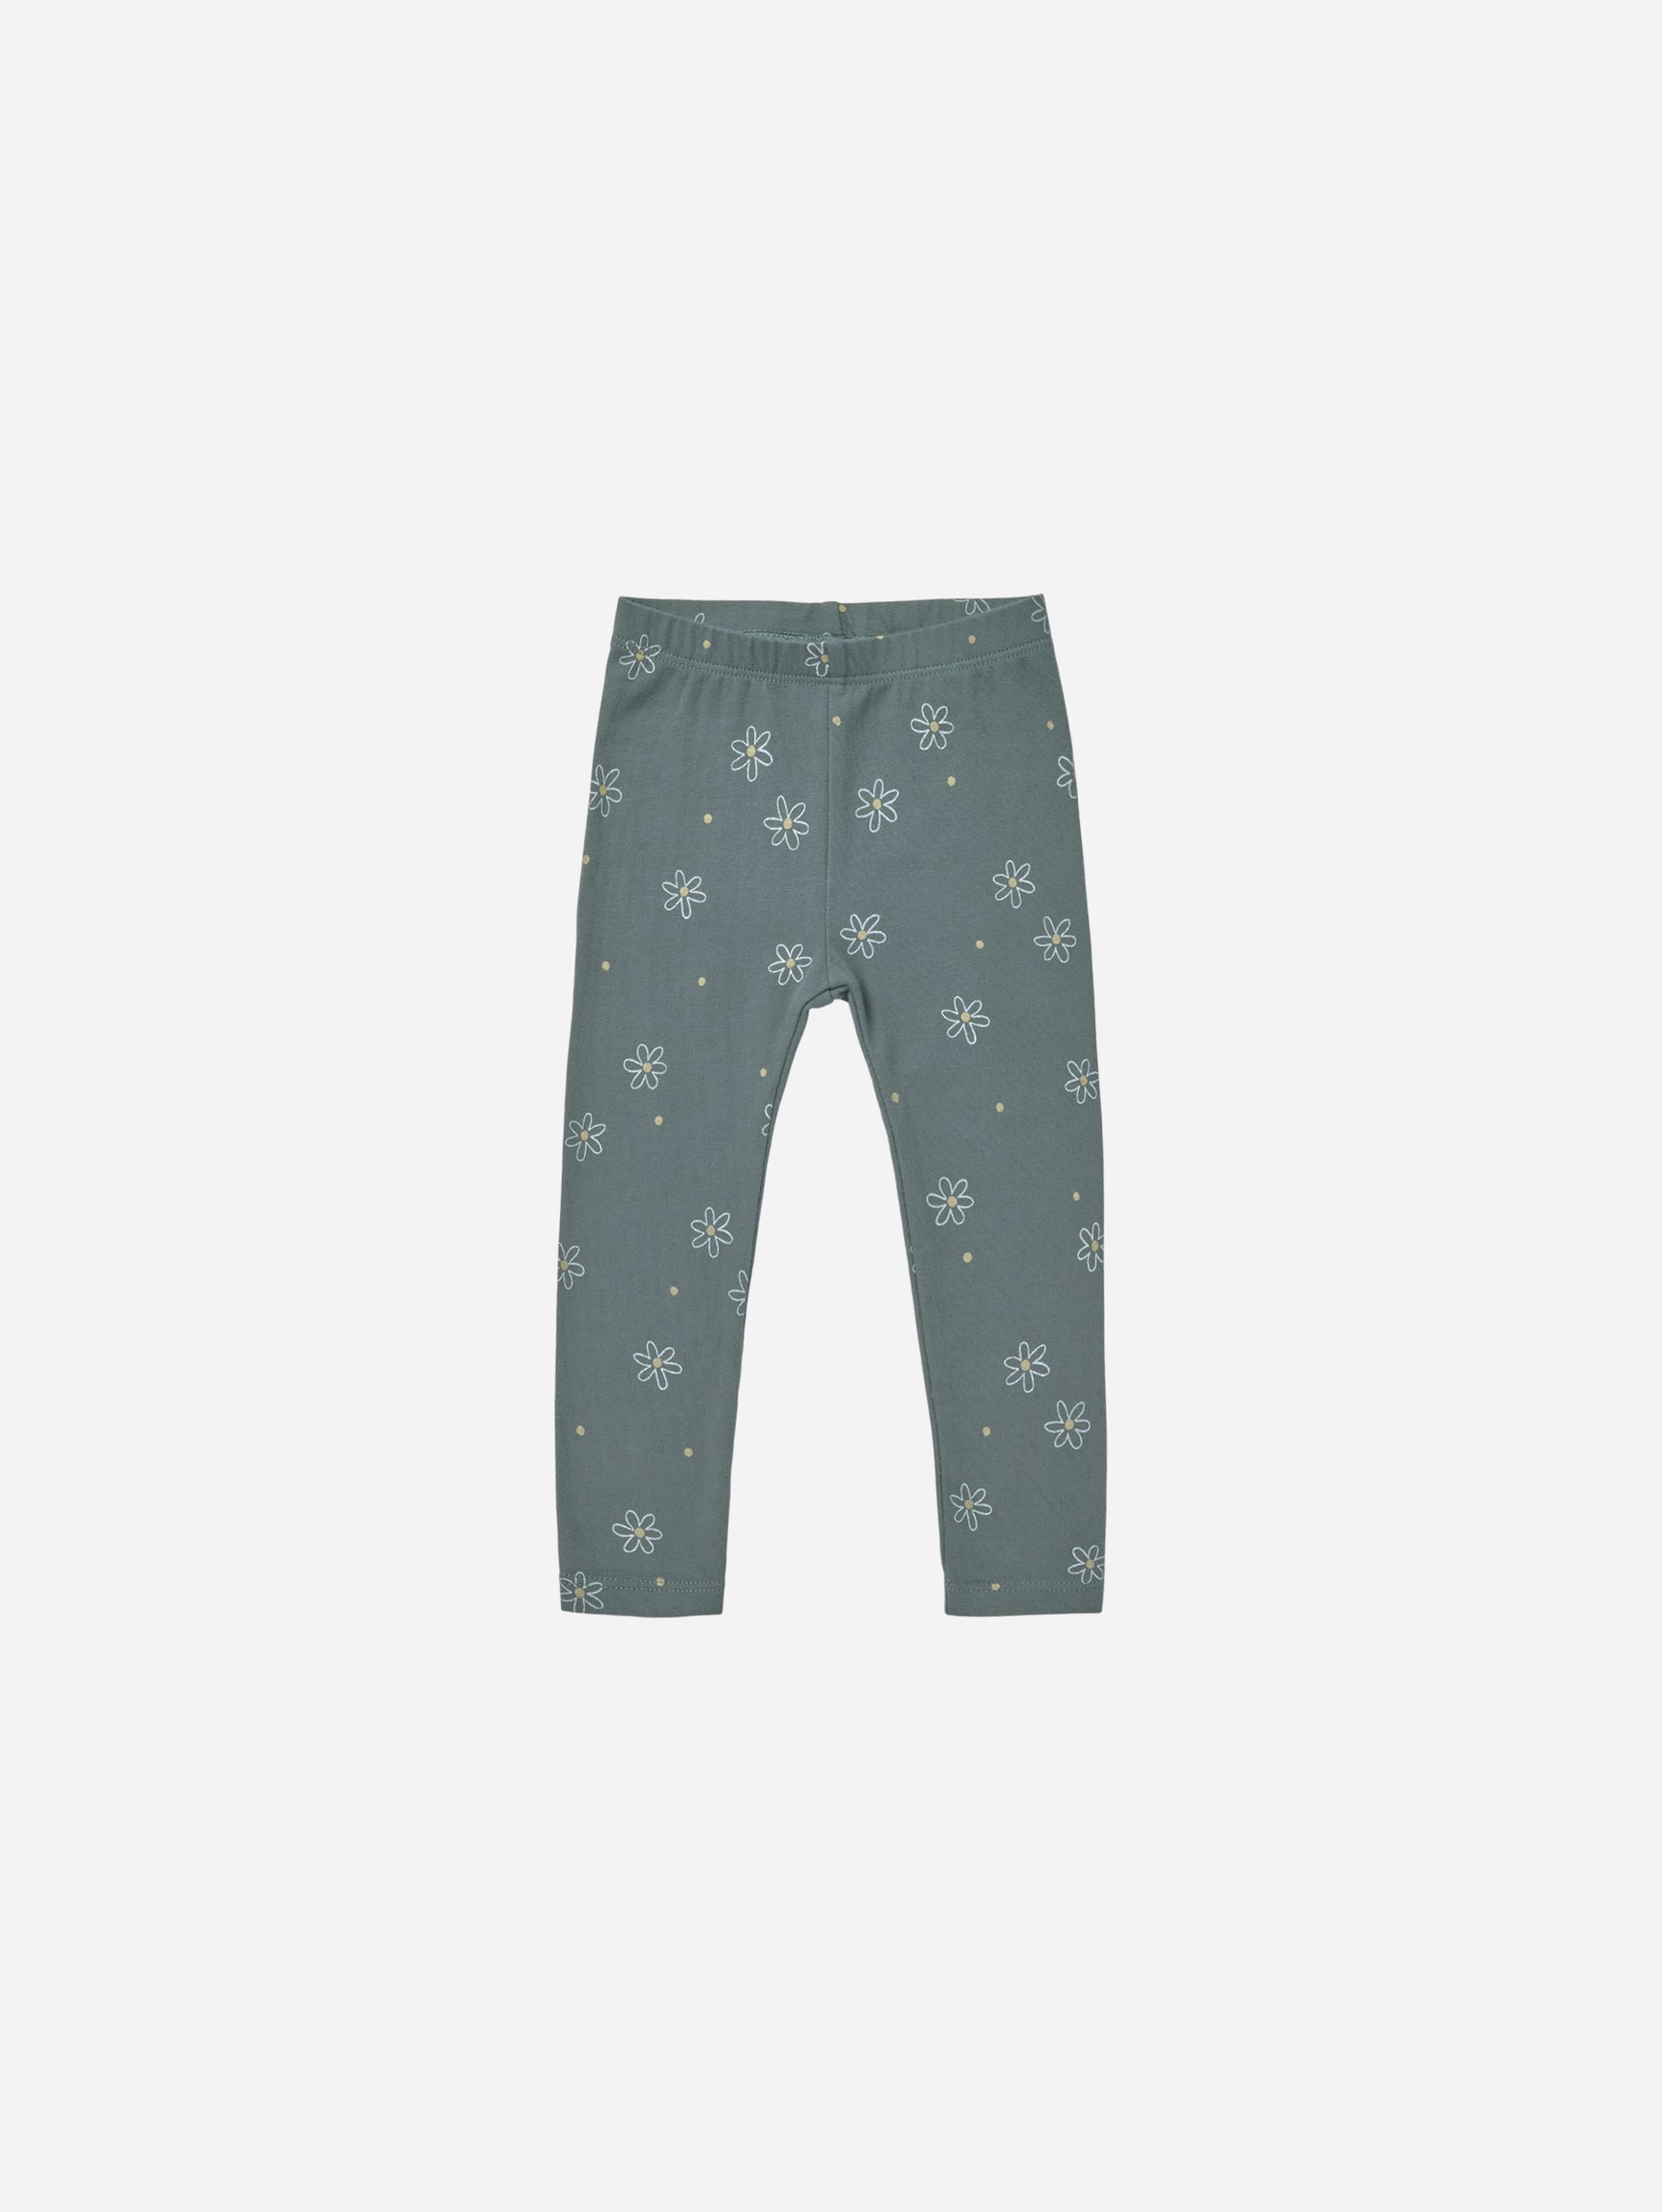 Legging || Daisies - Rylee + Cru | Kids Clothes | Trendy Baby Clothes | Modern Infant Outfits |